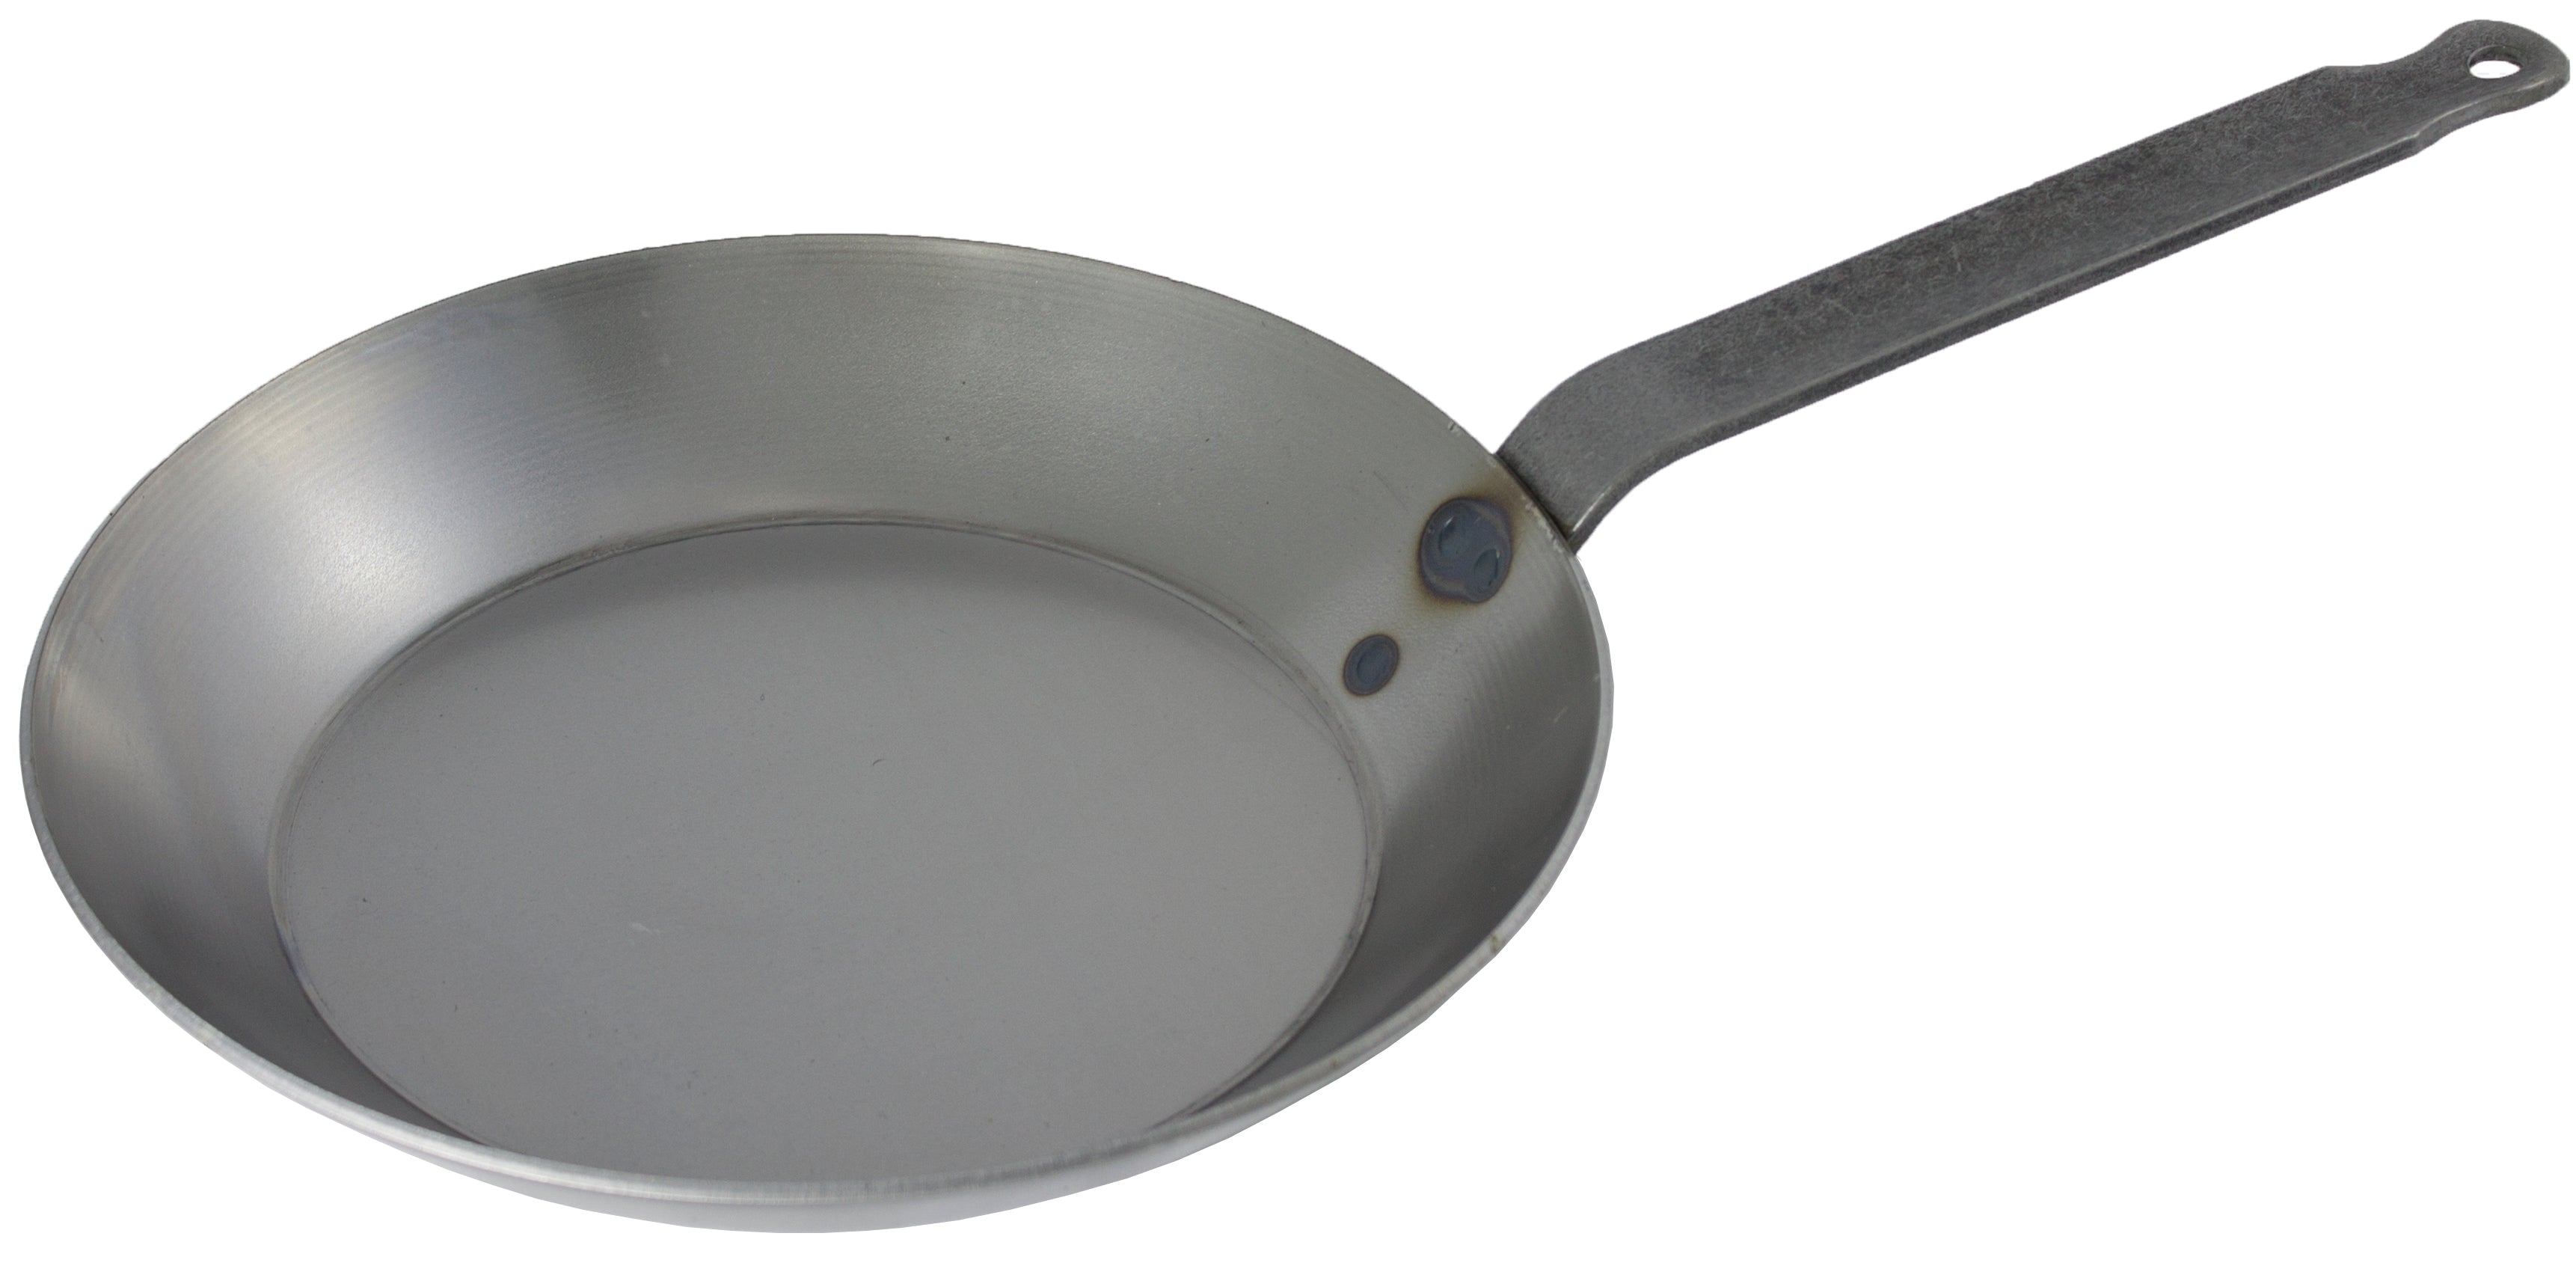 How is she looking? Matfer Bourgeat fry pan 1 year anniversary : r